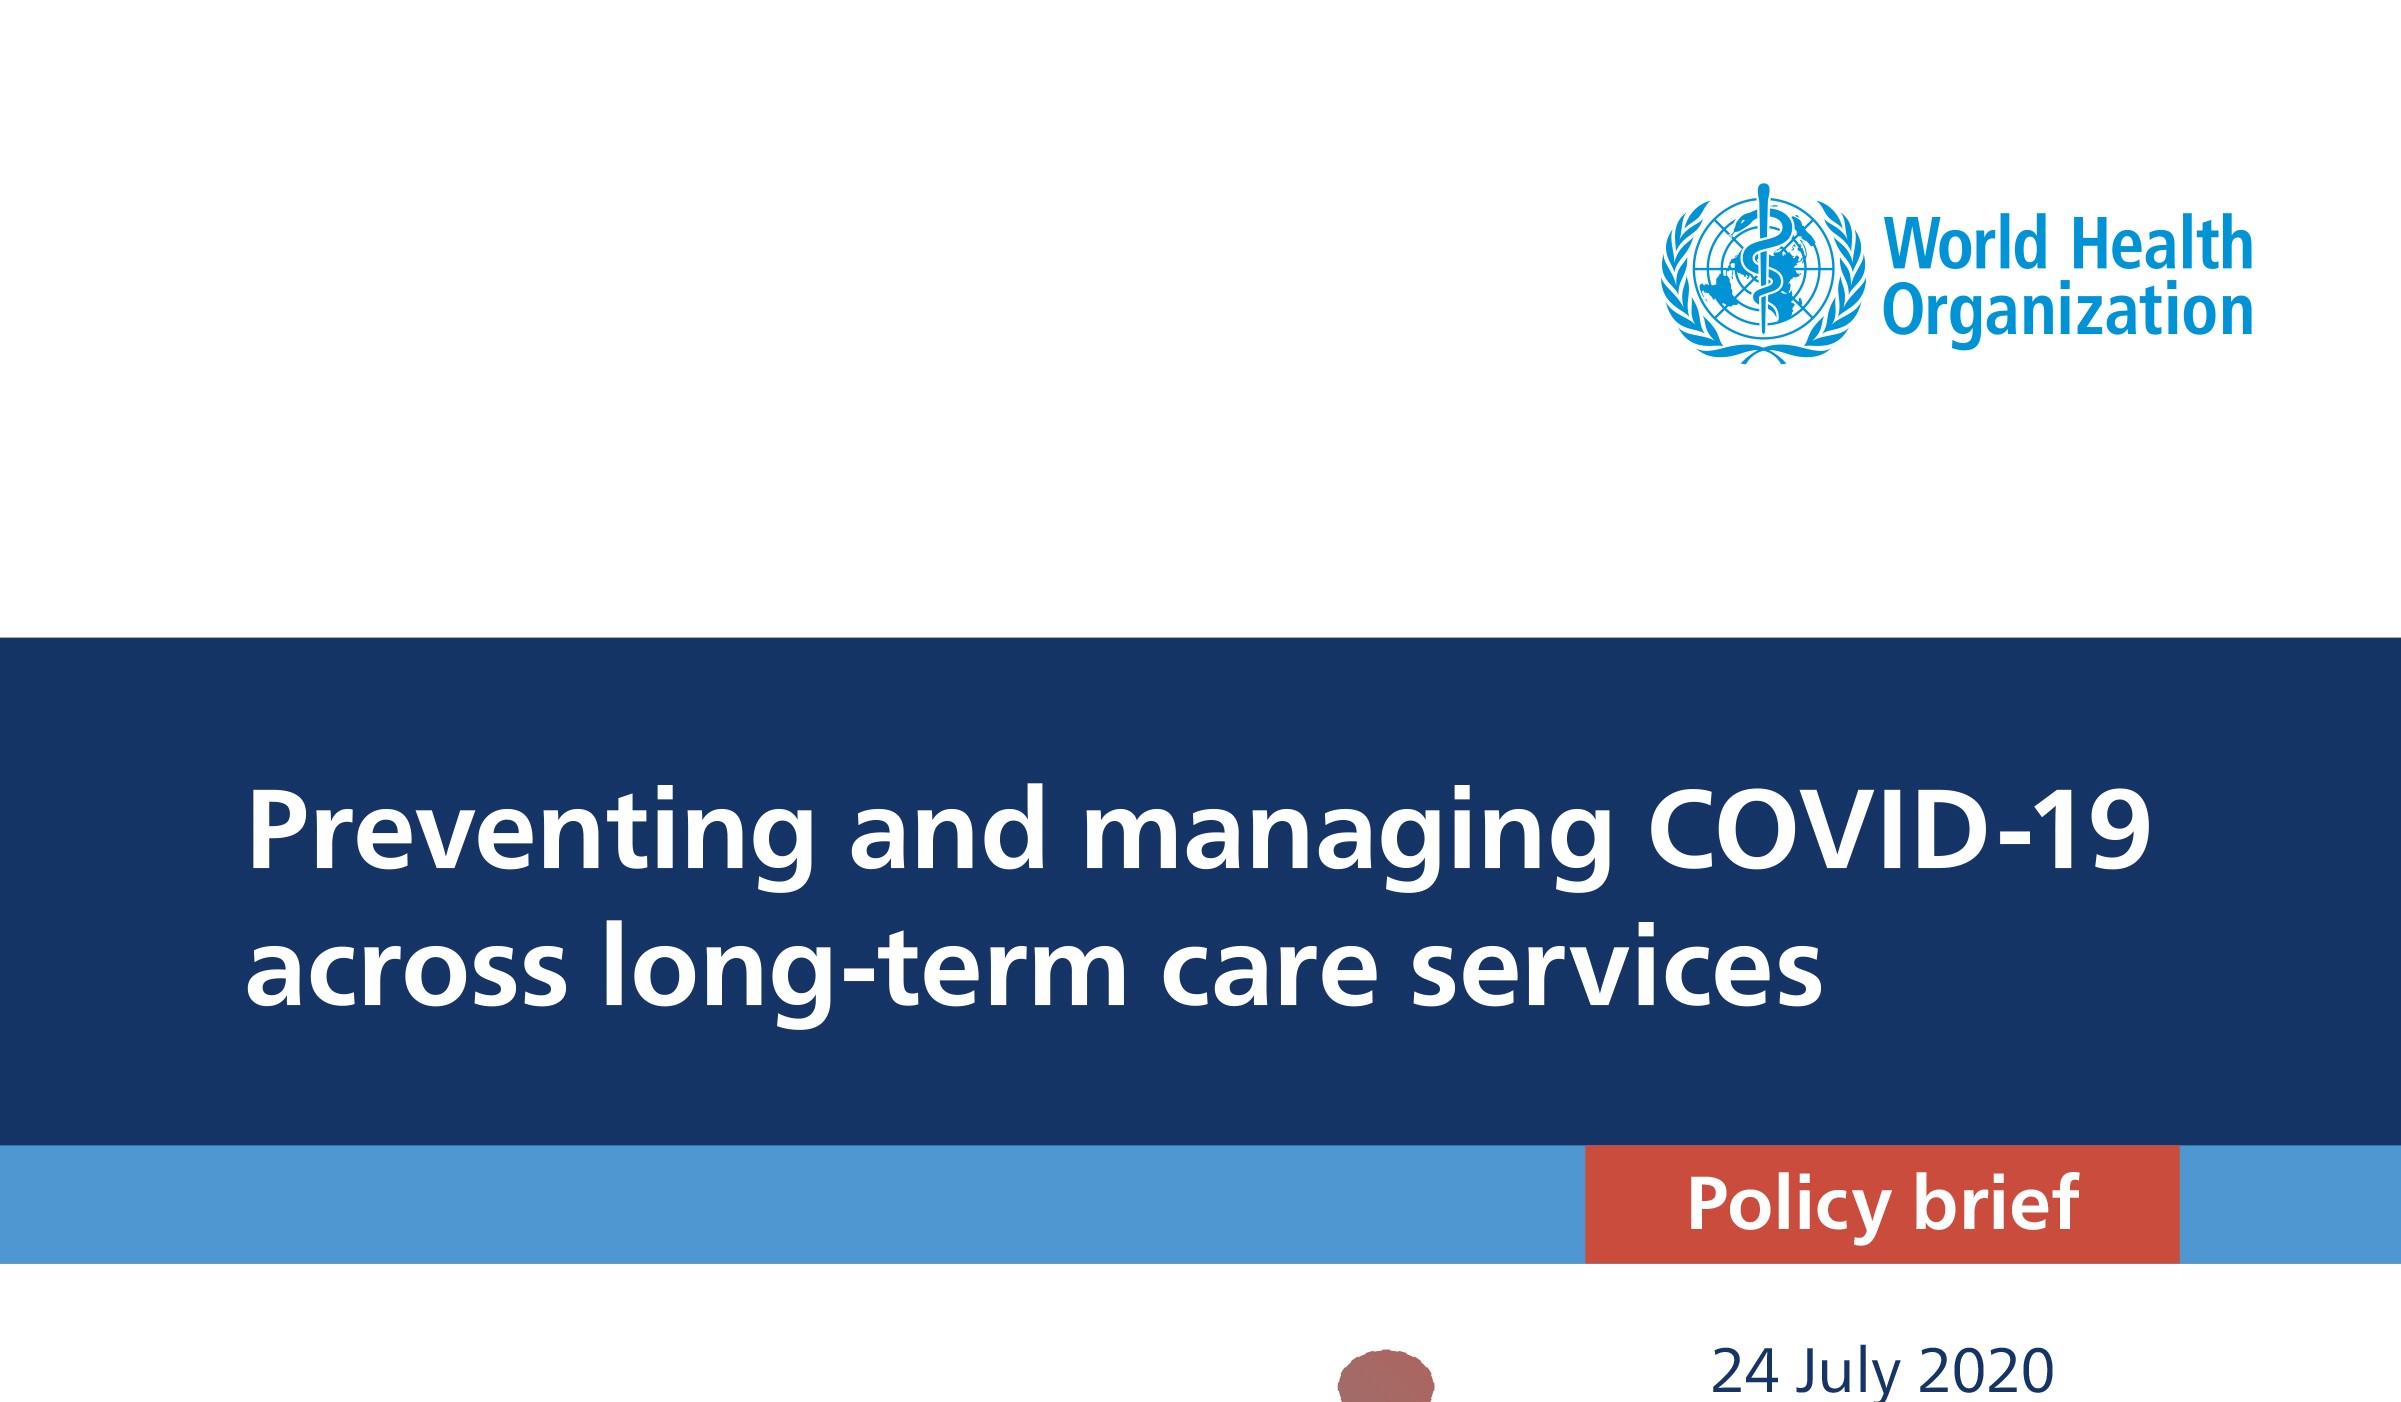 OMS disponibiliza documento “Preventing and managing COVID-19 across long-term care services”